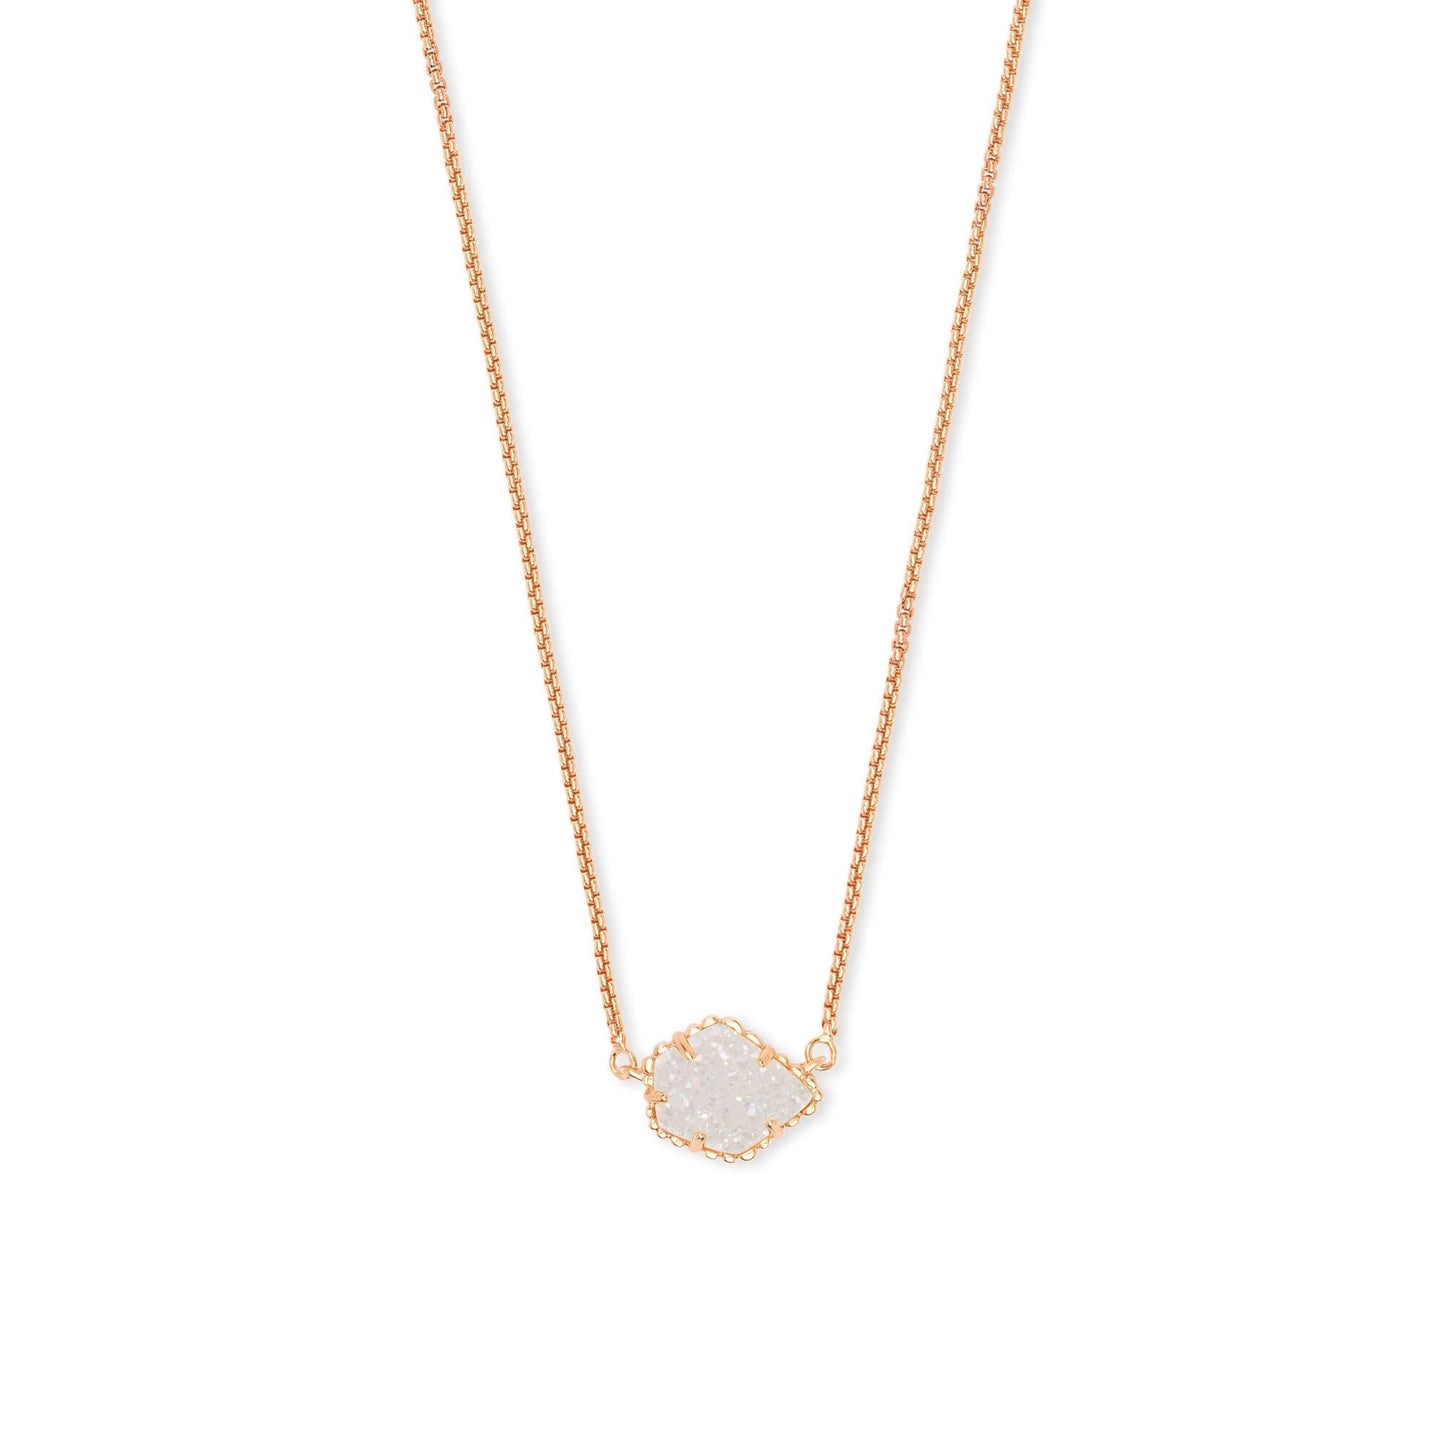 Tess Rose Gold Iridescent Drusy Necklace